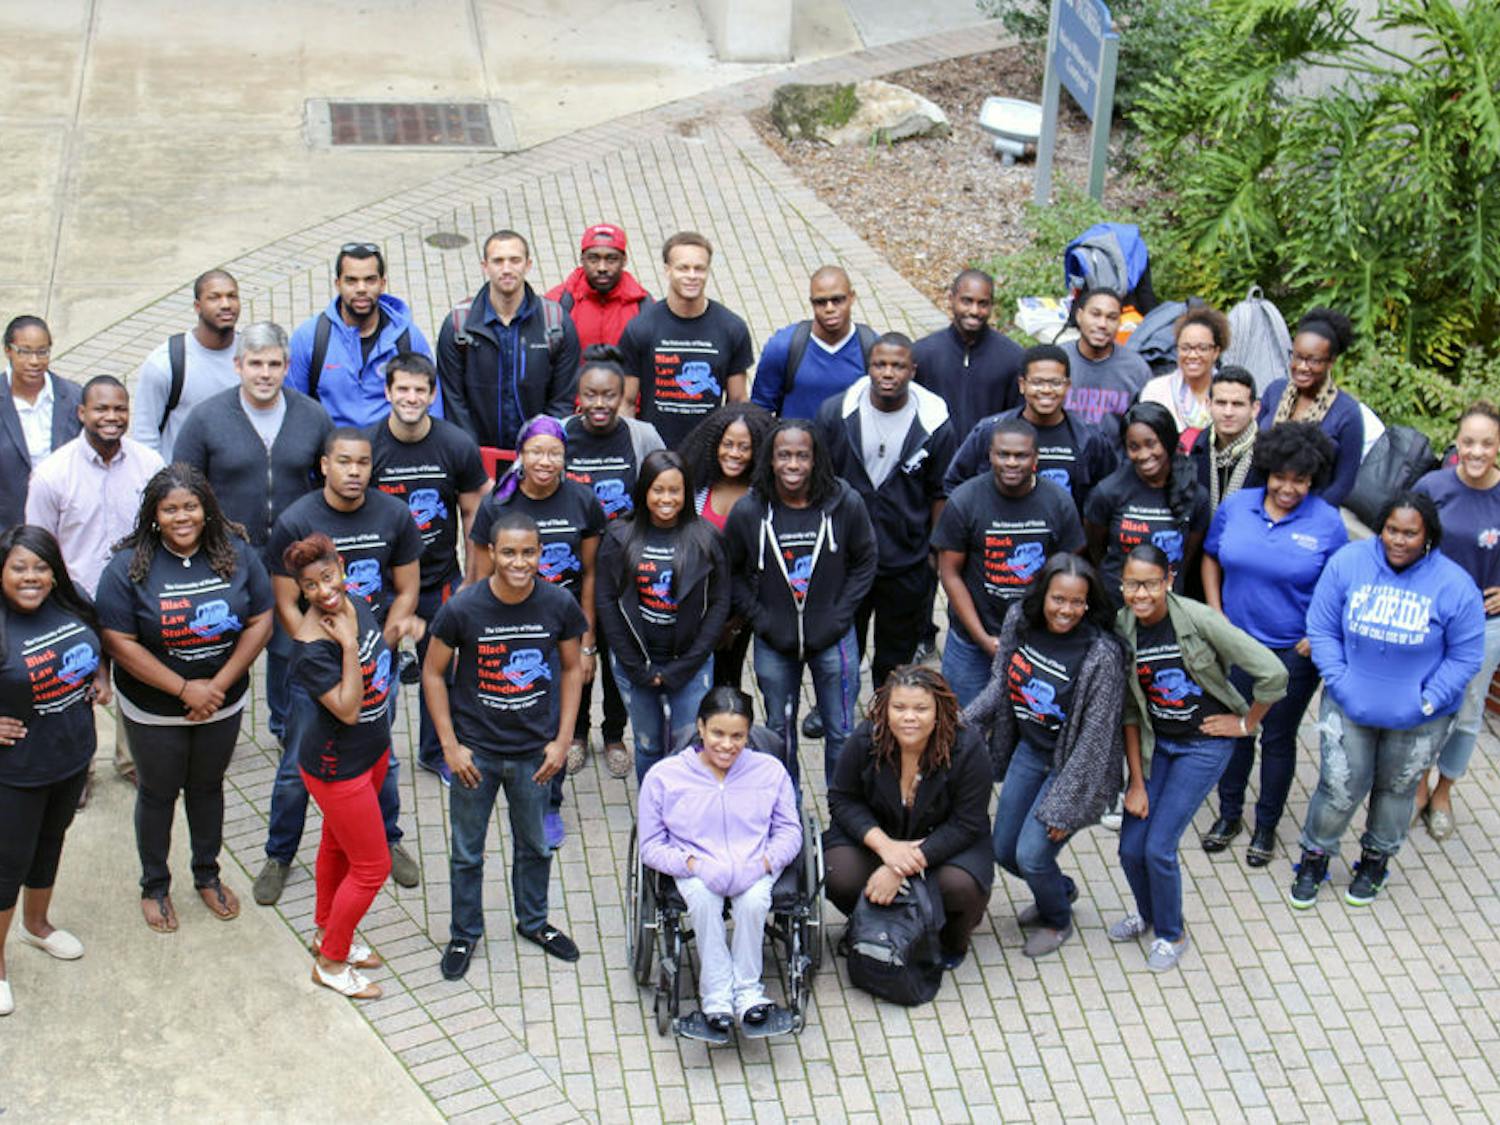 Members of the Black Law Students Association pose for a photo after the UF organization won Regional Chapter of the Year for the third consecutive year. “I personally look forward to continuing that legacy and continuing to make our chapter even better,” said Candace Spencer, a first-year UF law student who will start her term as BLSA president on Friday.